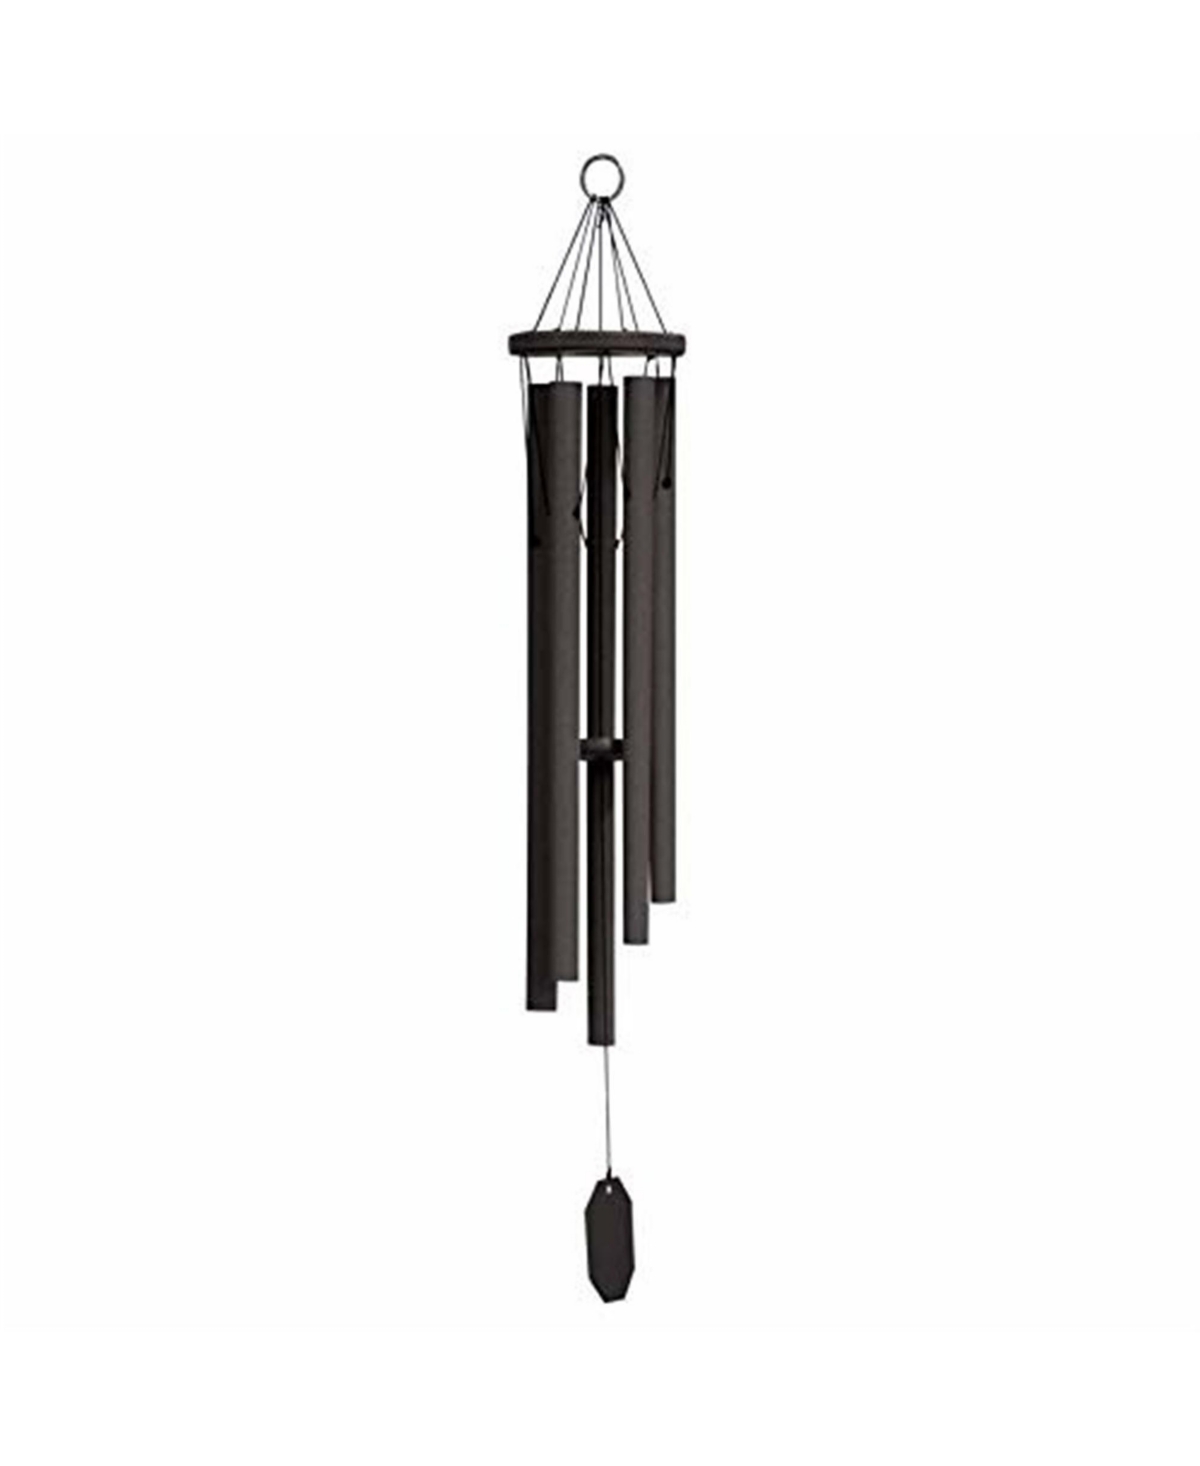 Zephyr Valley Wind Chime Amish Crafted, Black, 37in - Black